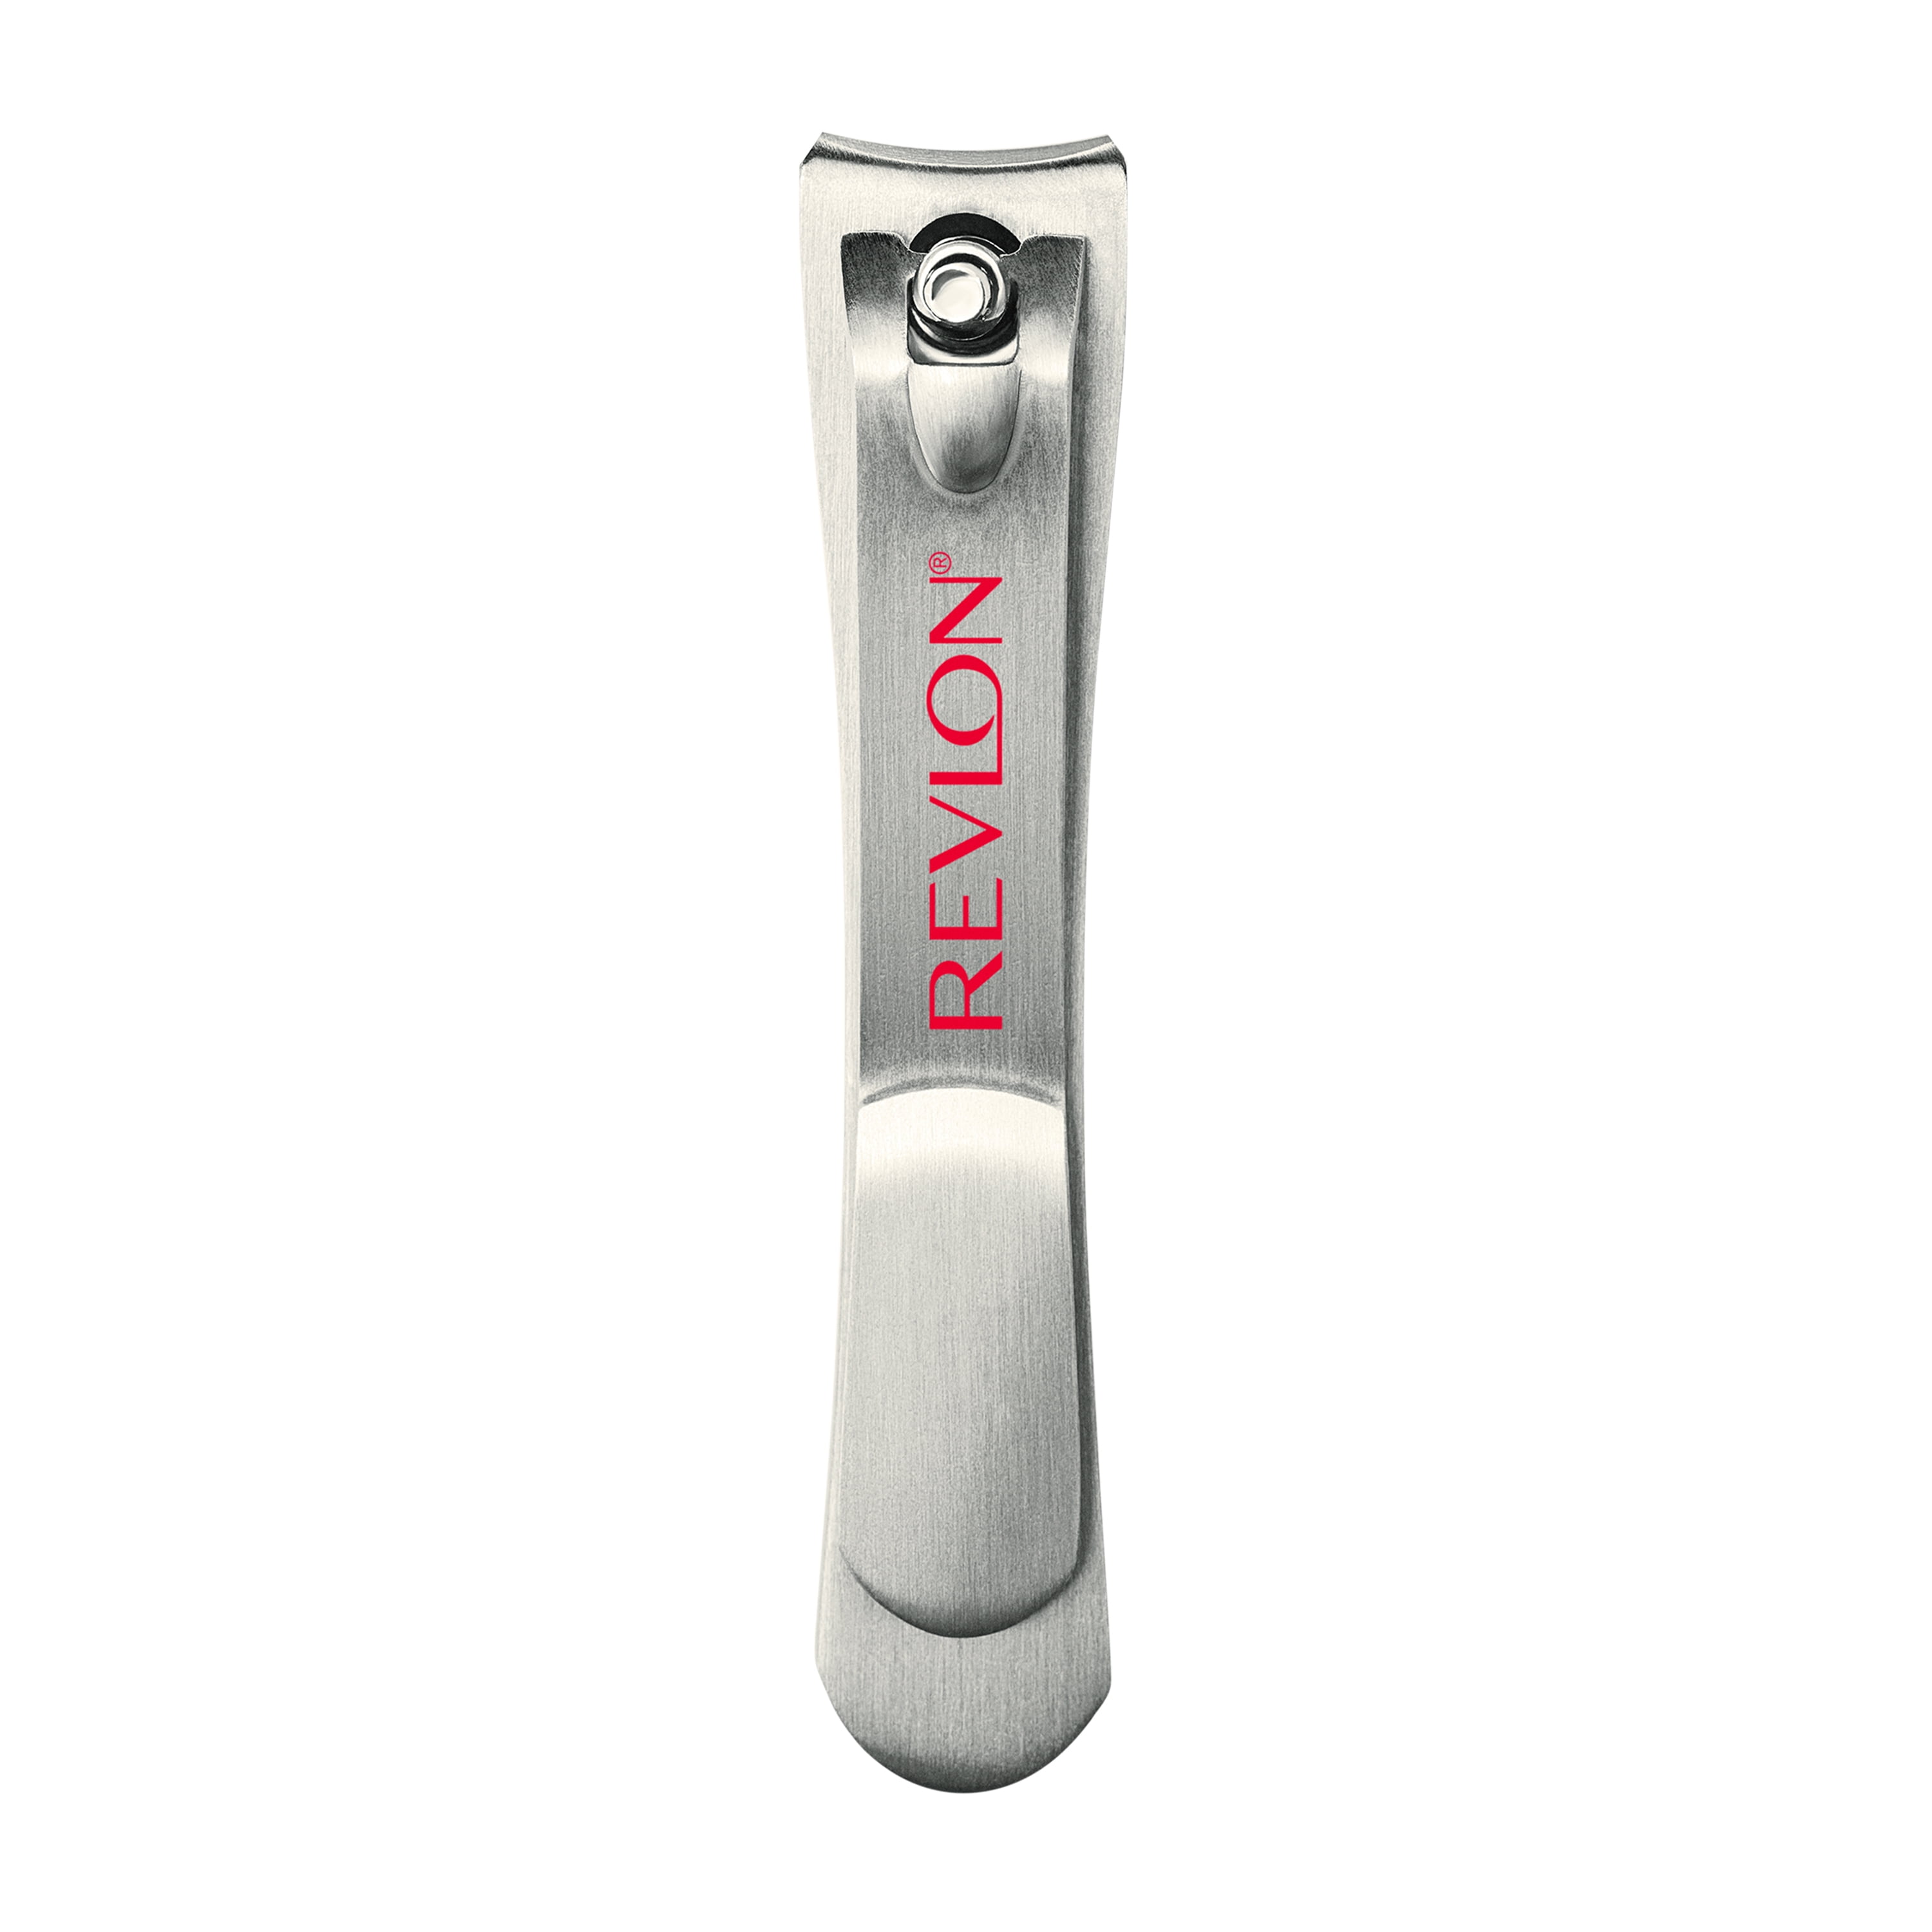 Revlon Catch-All Nail Clipper with Catcher, Stainless Steel Curved Bla –  Vitabox